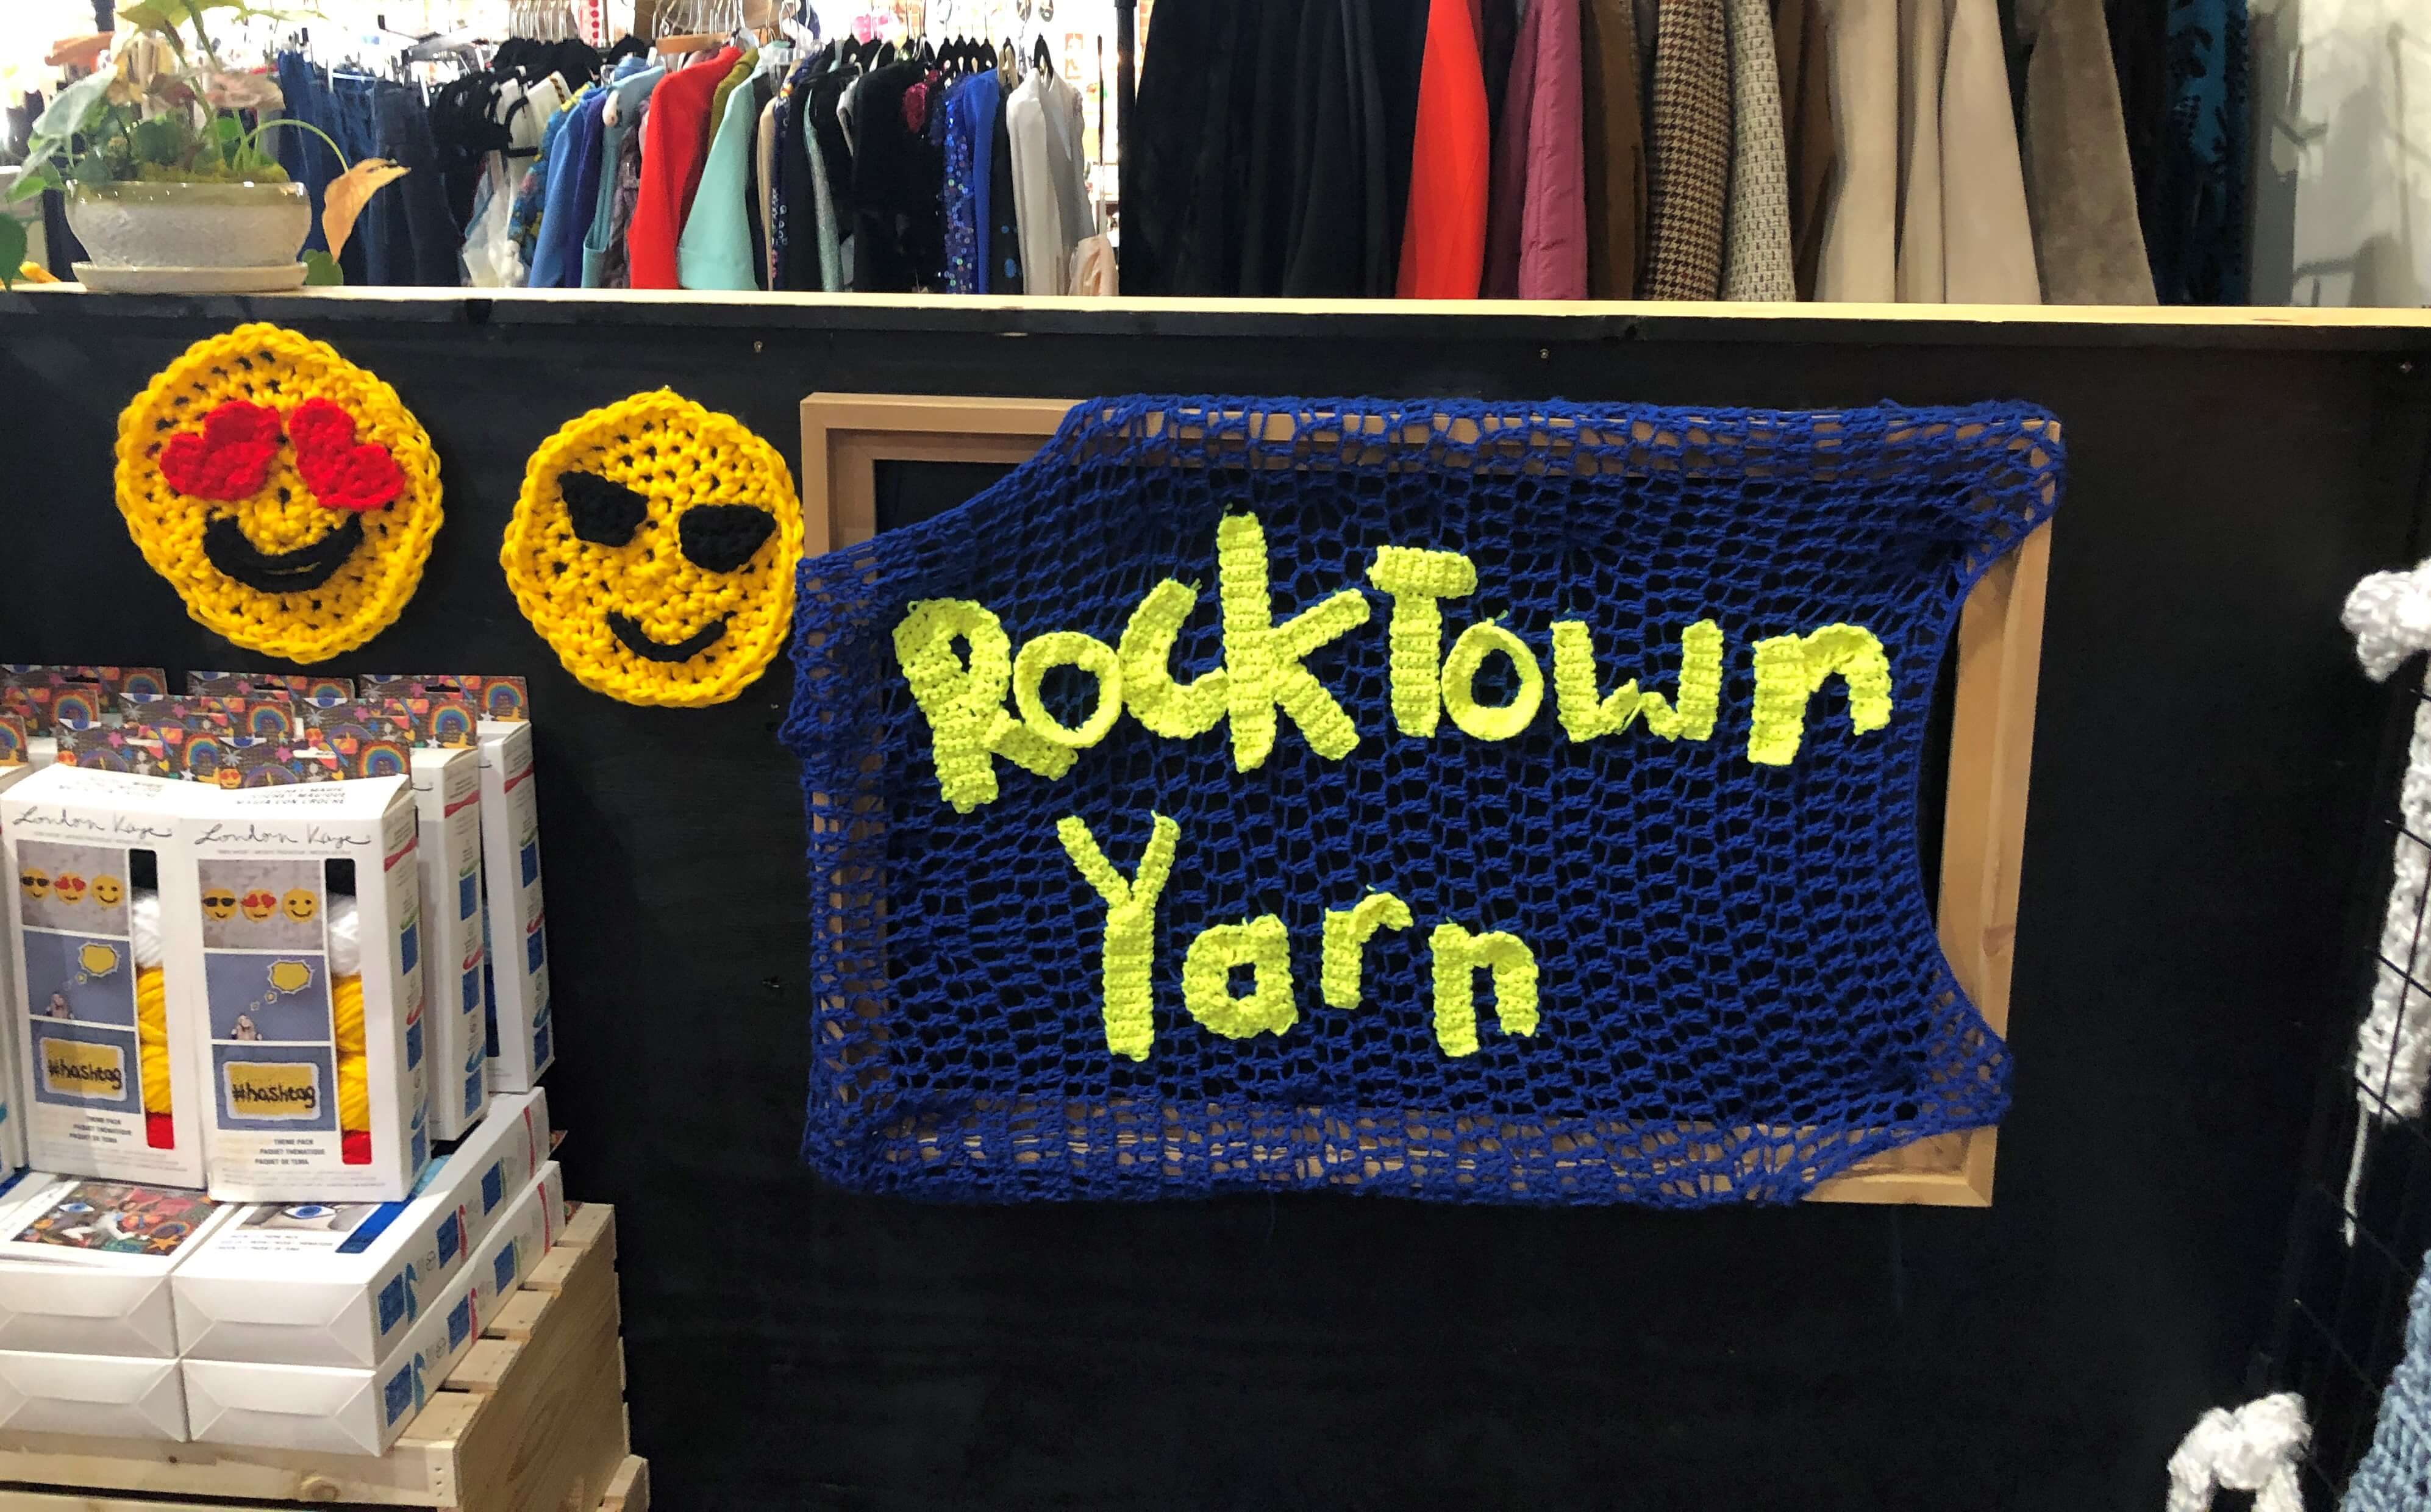 a handmade yarn sign reads "Rocktown Yarn" and is flanked by smiling and heart-eyed emojis